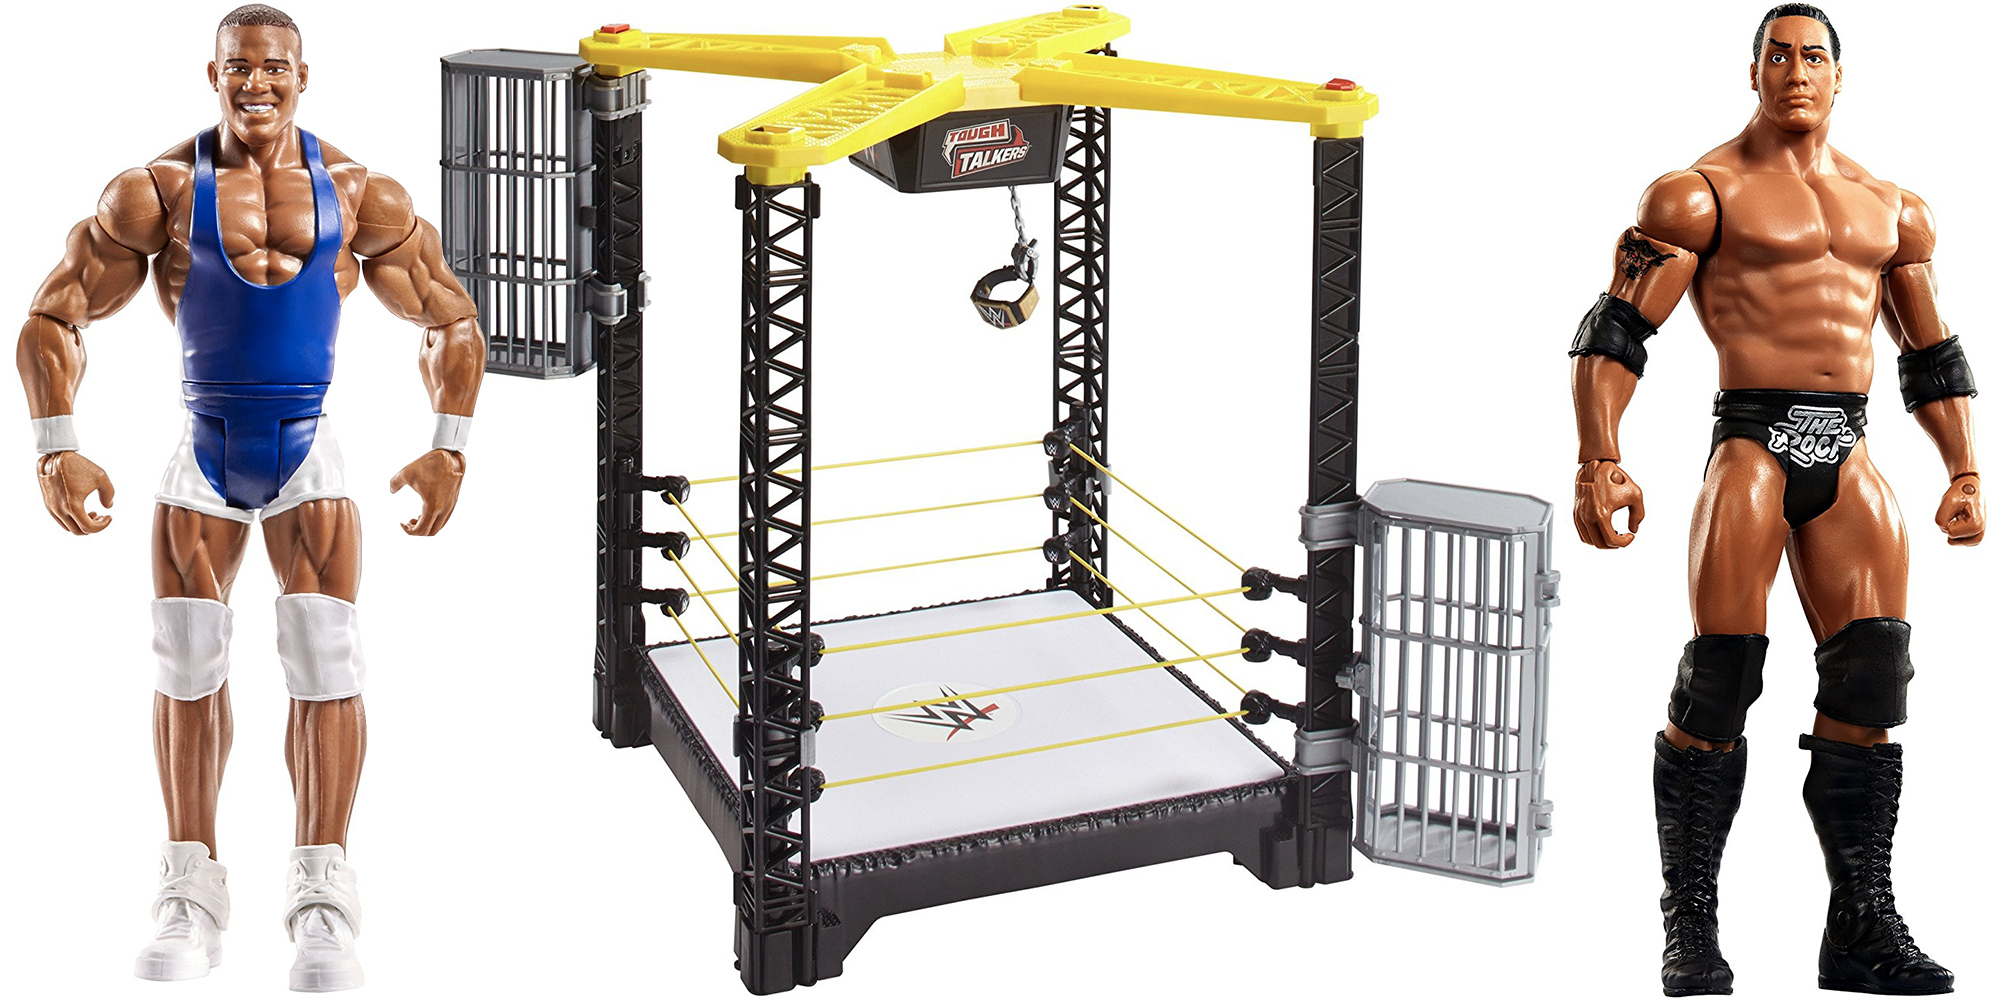 Grab A Wwe Action Figure From Just 5 In Today S Amazon Gold Box 9to5toys